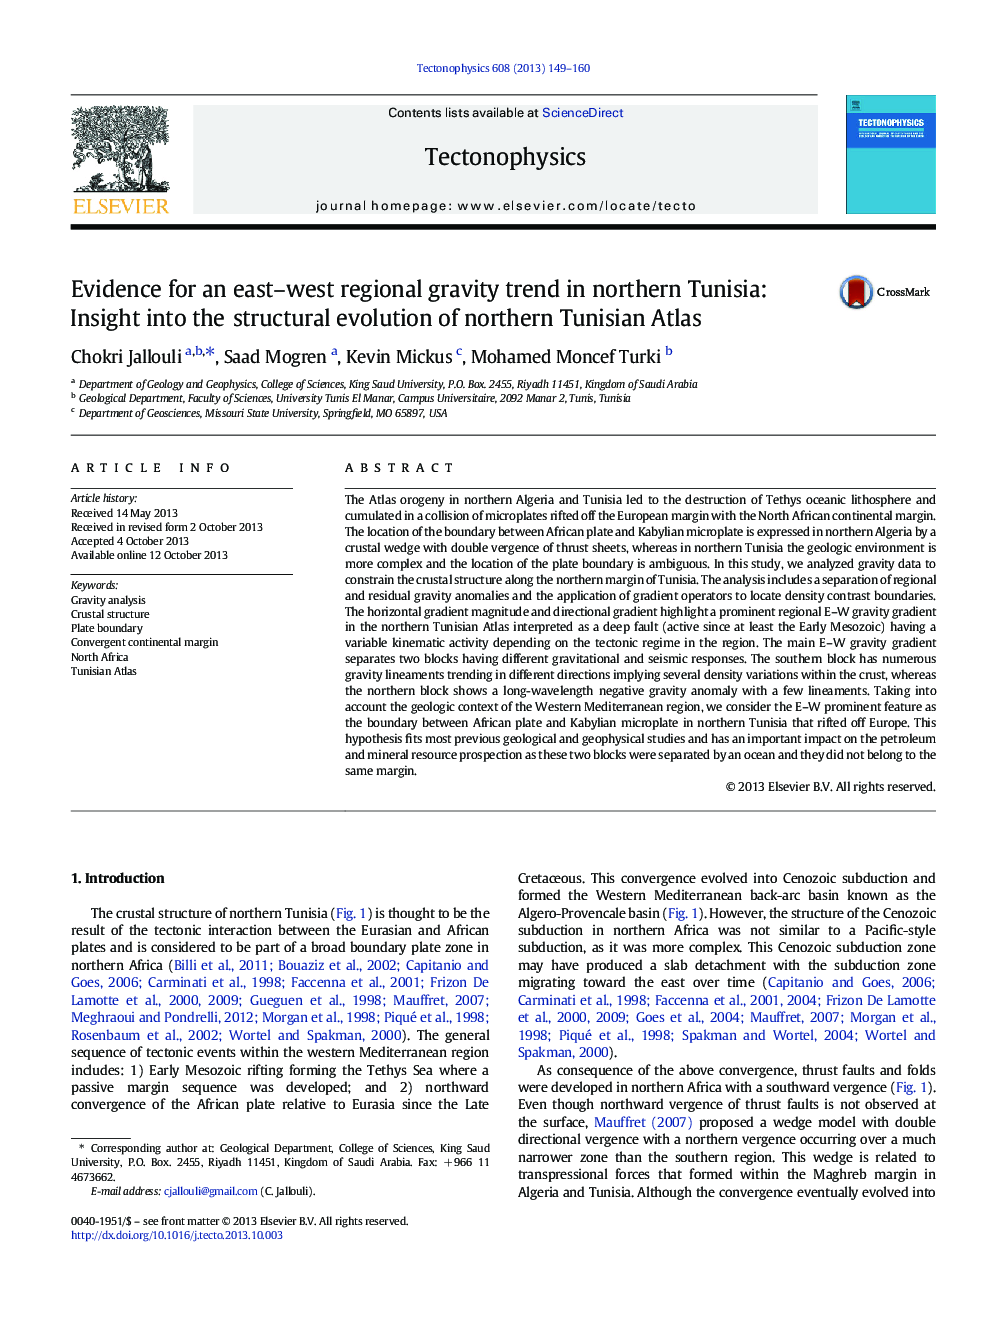 Evidence for an east-west regional gravity trend in northern Tunisia: Insight into the structural evolution of northern Tunisian Atlas